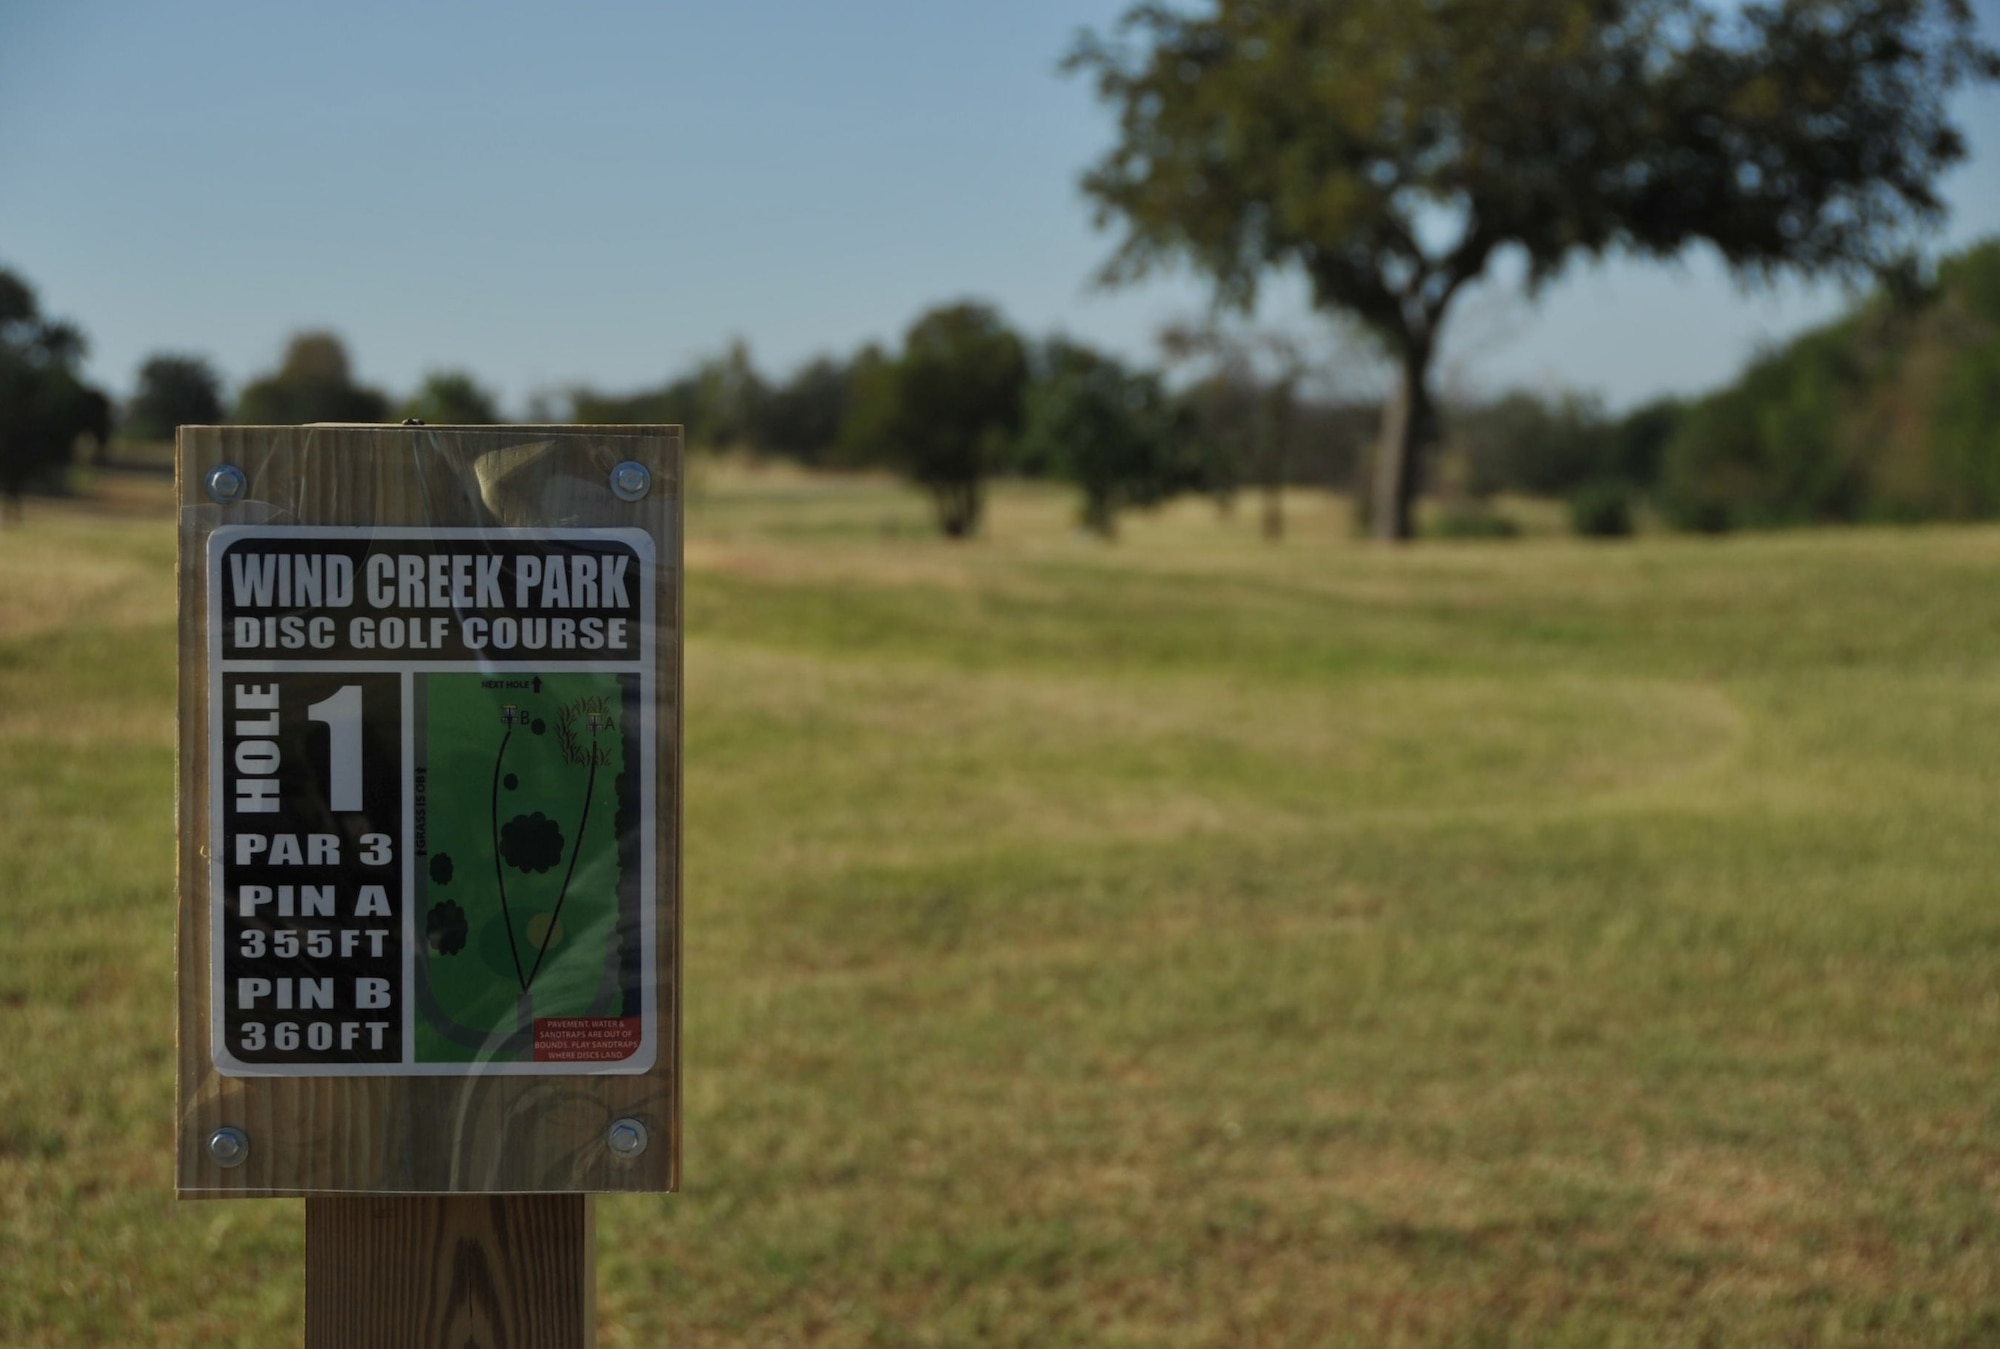 Sheppard Air Force Base, Texas, is now home to a new 18-hole disc golf course, replacing the original golf course which closed in June due to a change in Defense Department policy. Sheppard partnered with the Wichita Falls Disc Golf Association to complete the project. (U.S. Air Force photo/Airman 1st Class Robert L. McIlrath)